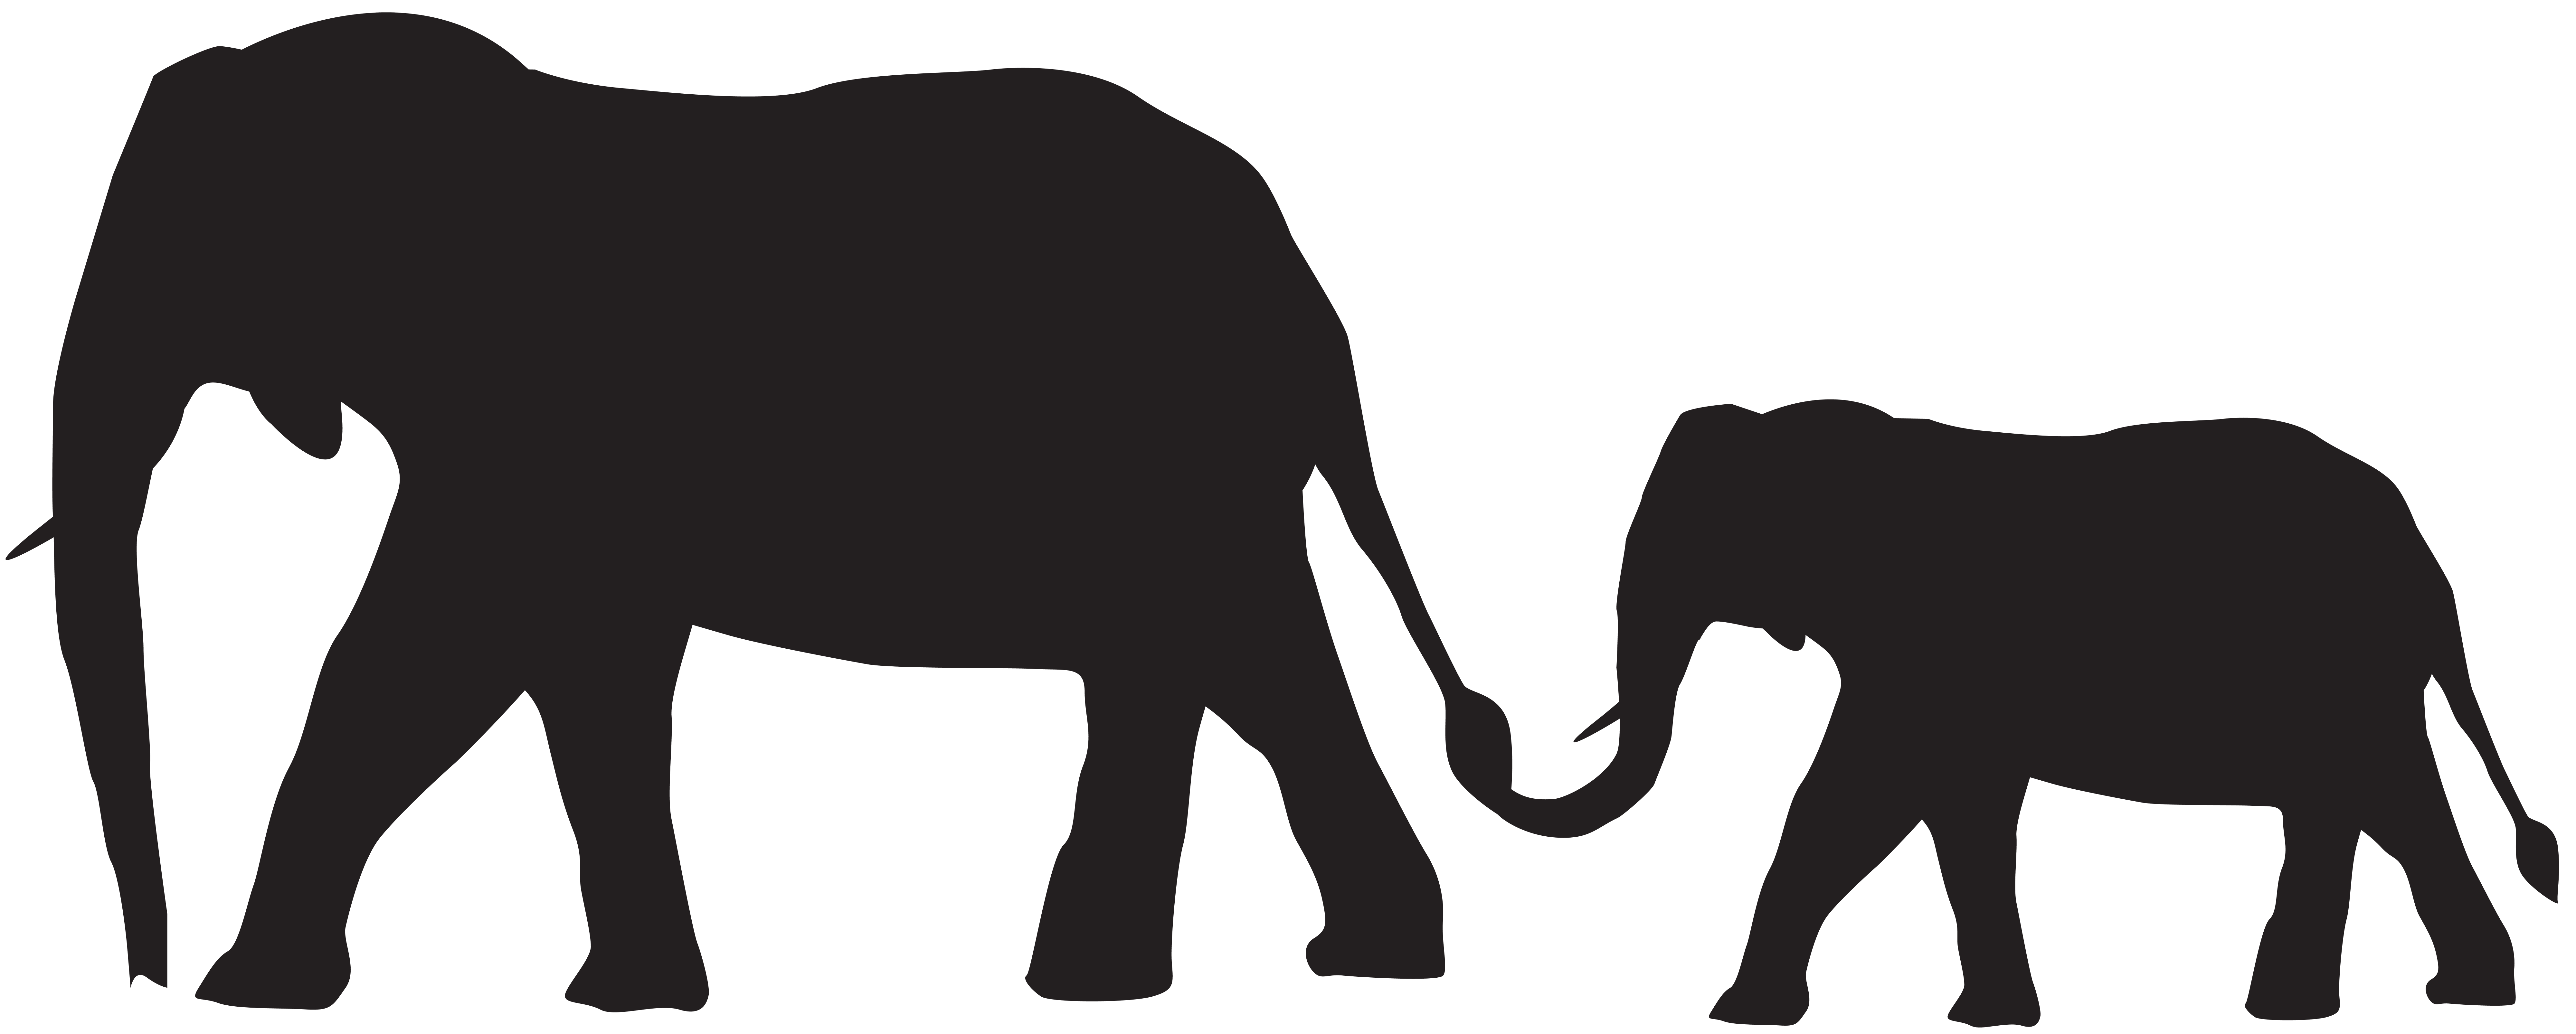 Mother And Baby Elephant Silhouette at GetDrawings | Free download